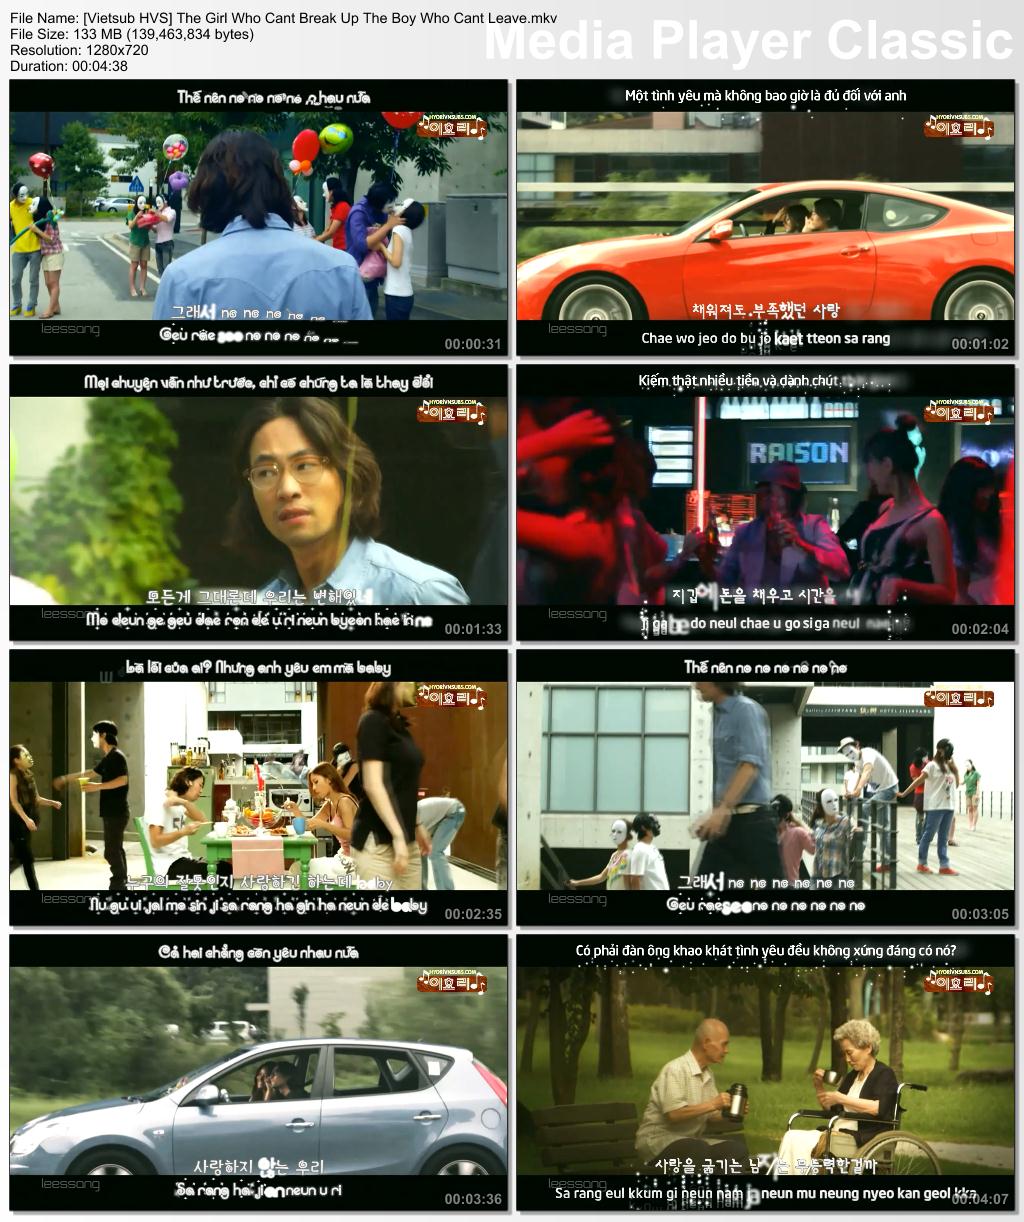 [Vietsub][2009] The Girl Who Can't Break Up, The Boy Who Can't Leave (Lee Ssang MV) Vietsu33